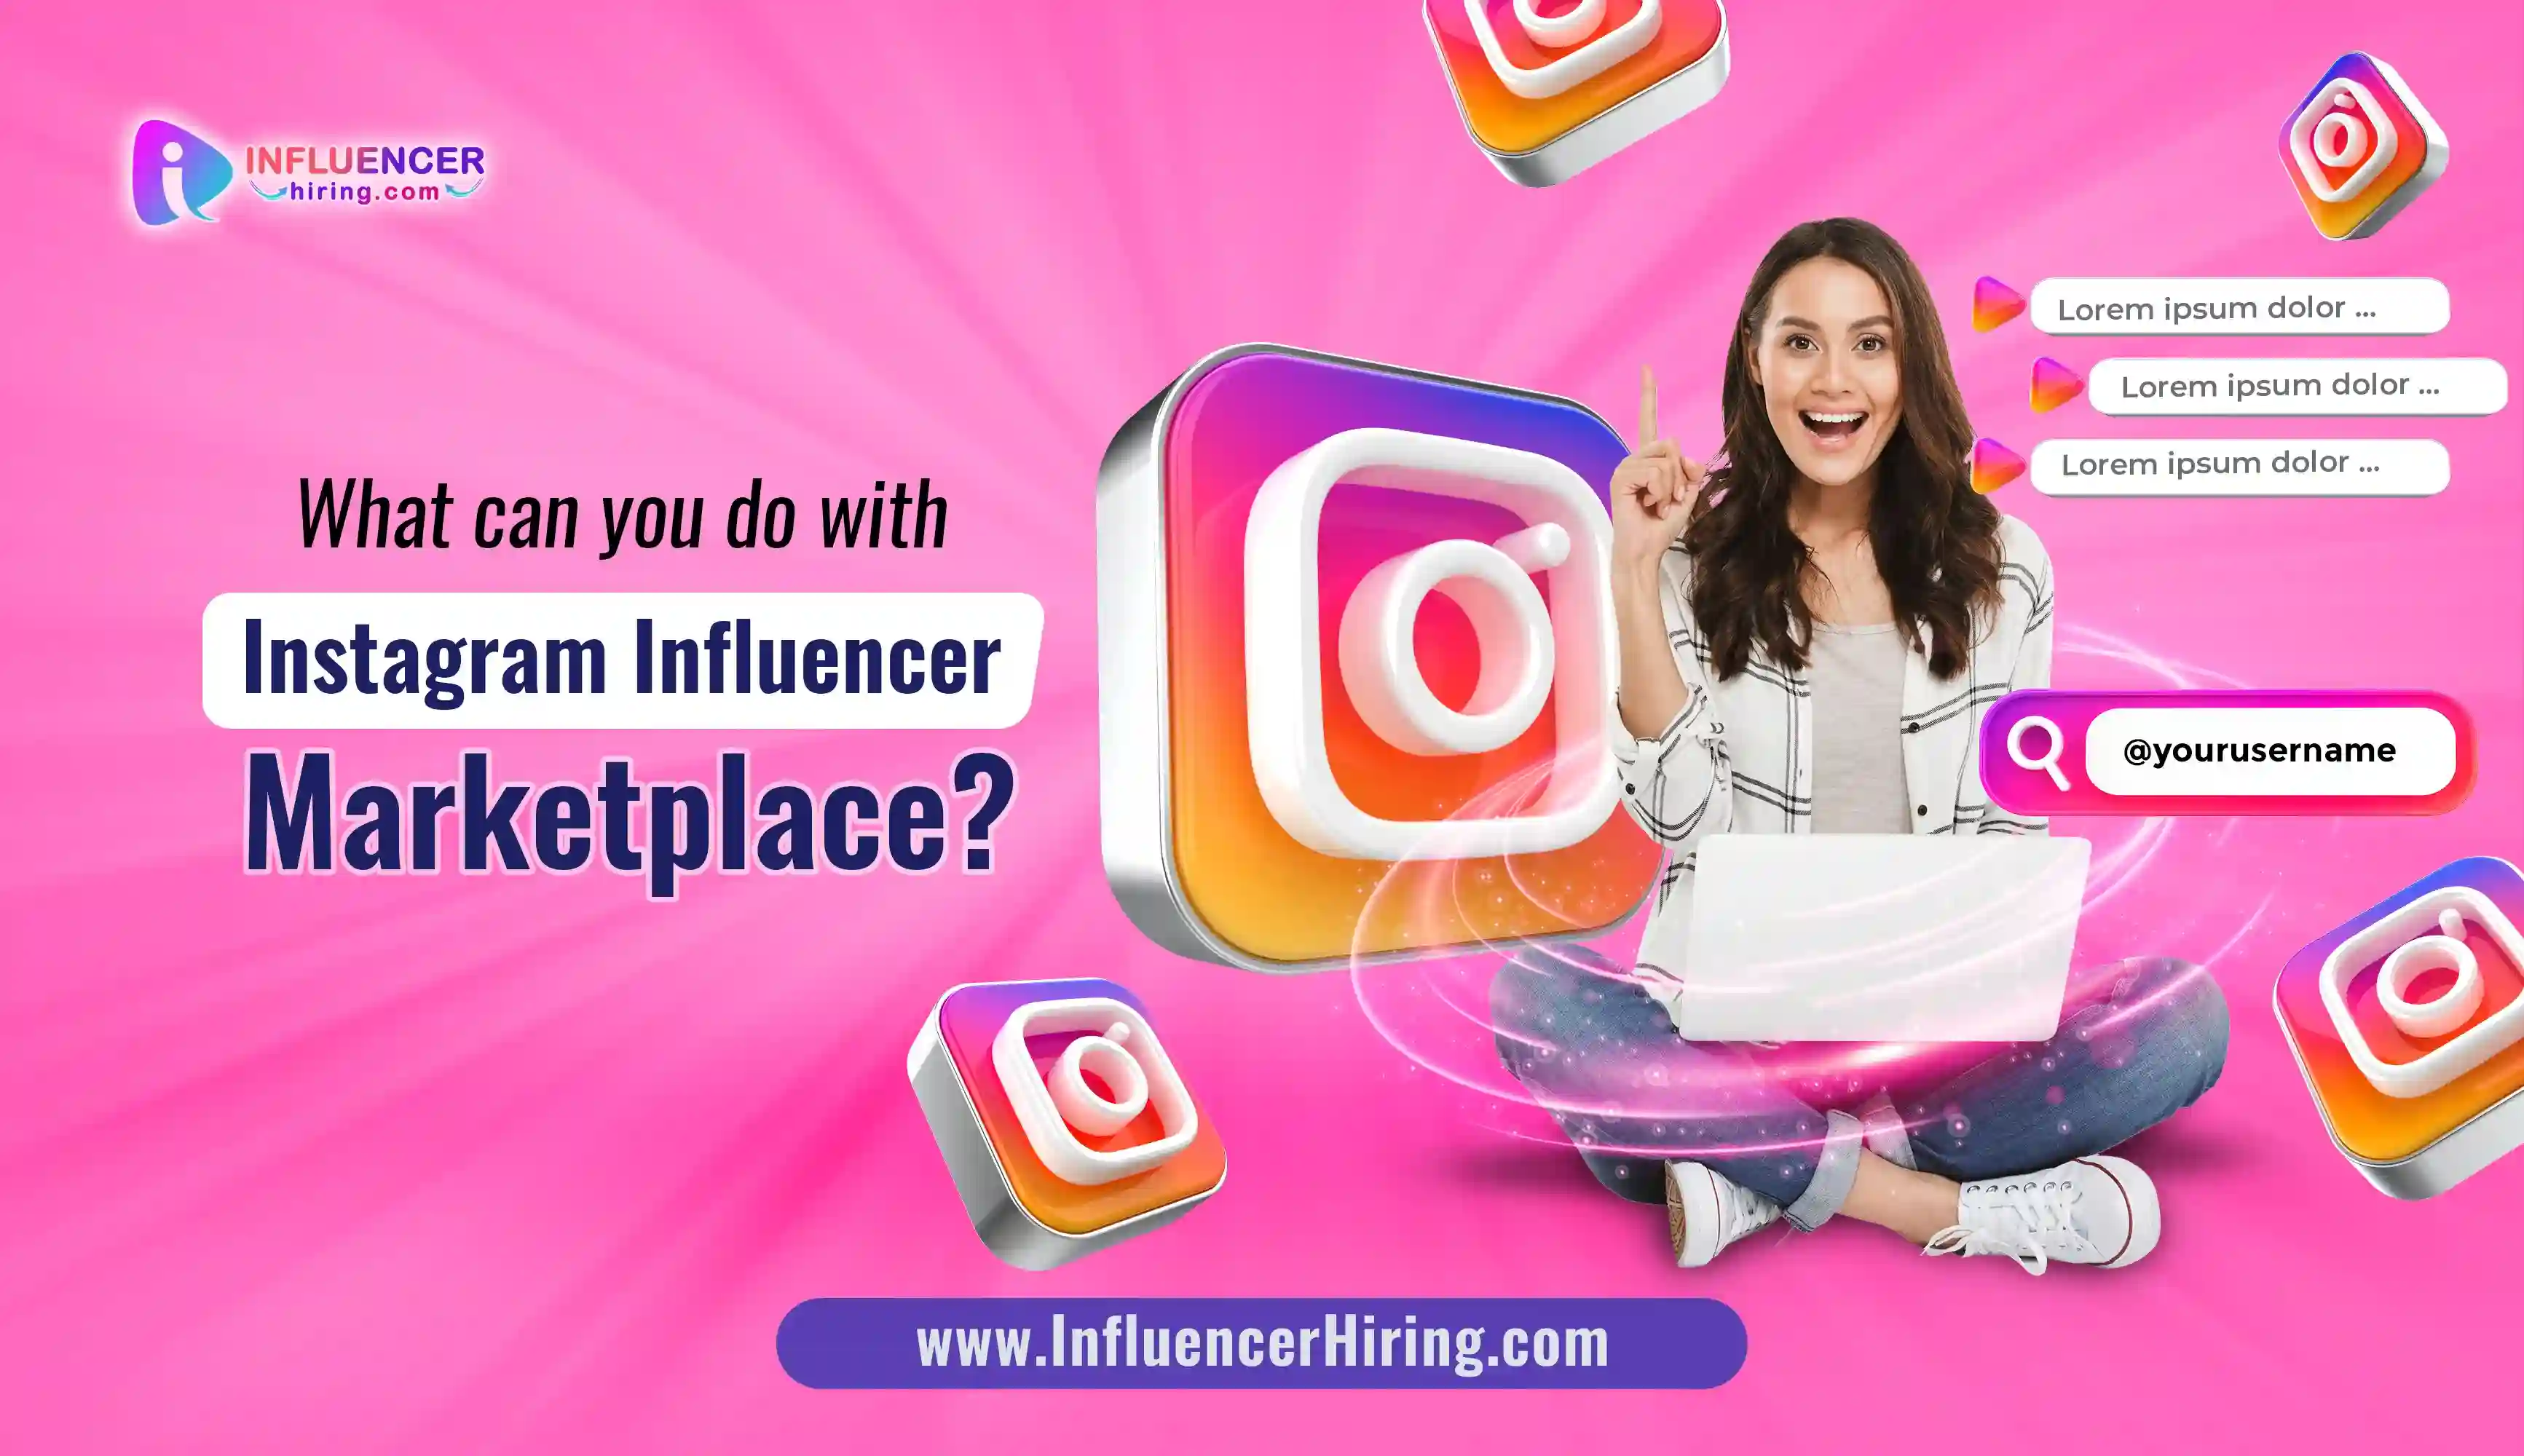 002_What_can_you_do_With_Instagram_Influencer_Marketplace.webp